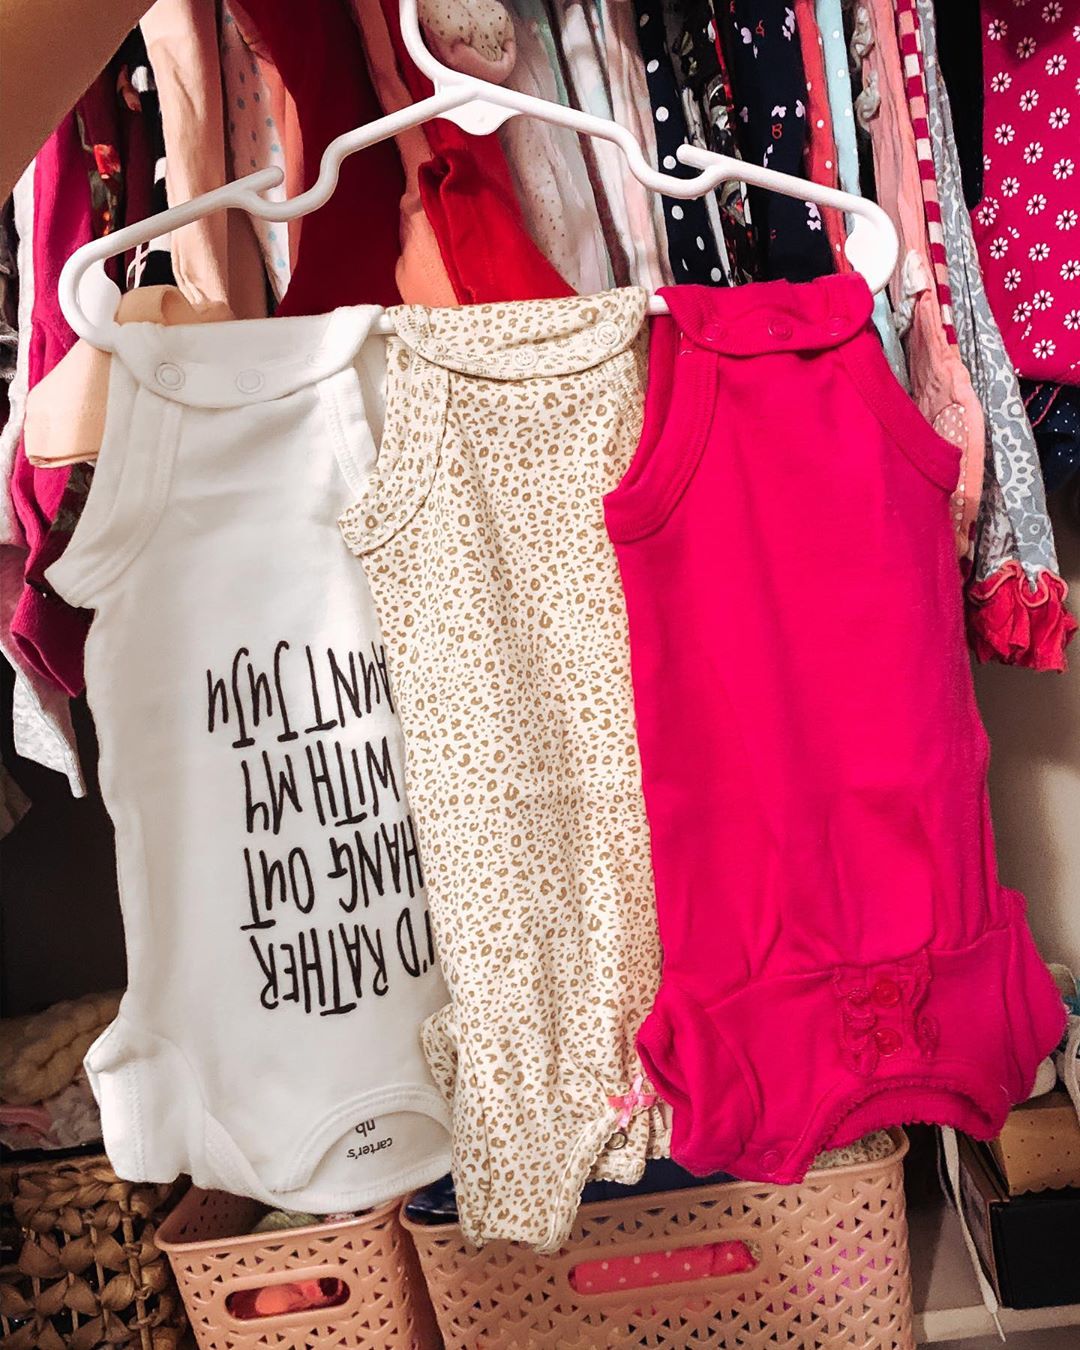 hanger with multiple baby clothes hanging off of it photo by Instagram user @joelle_mcclune